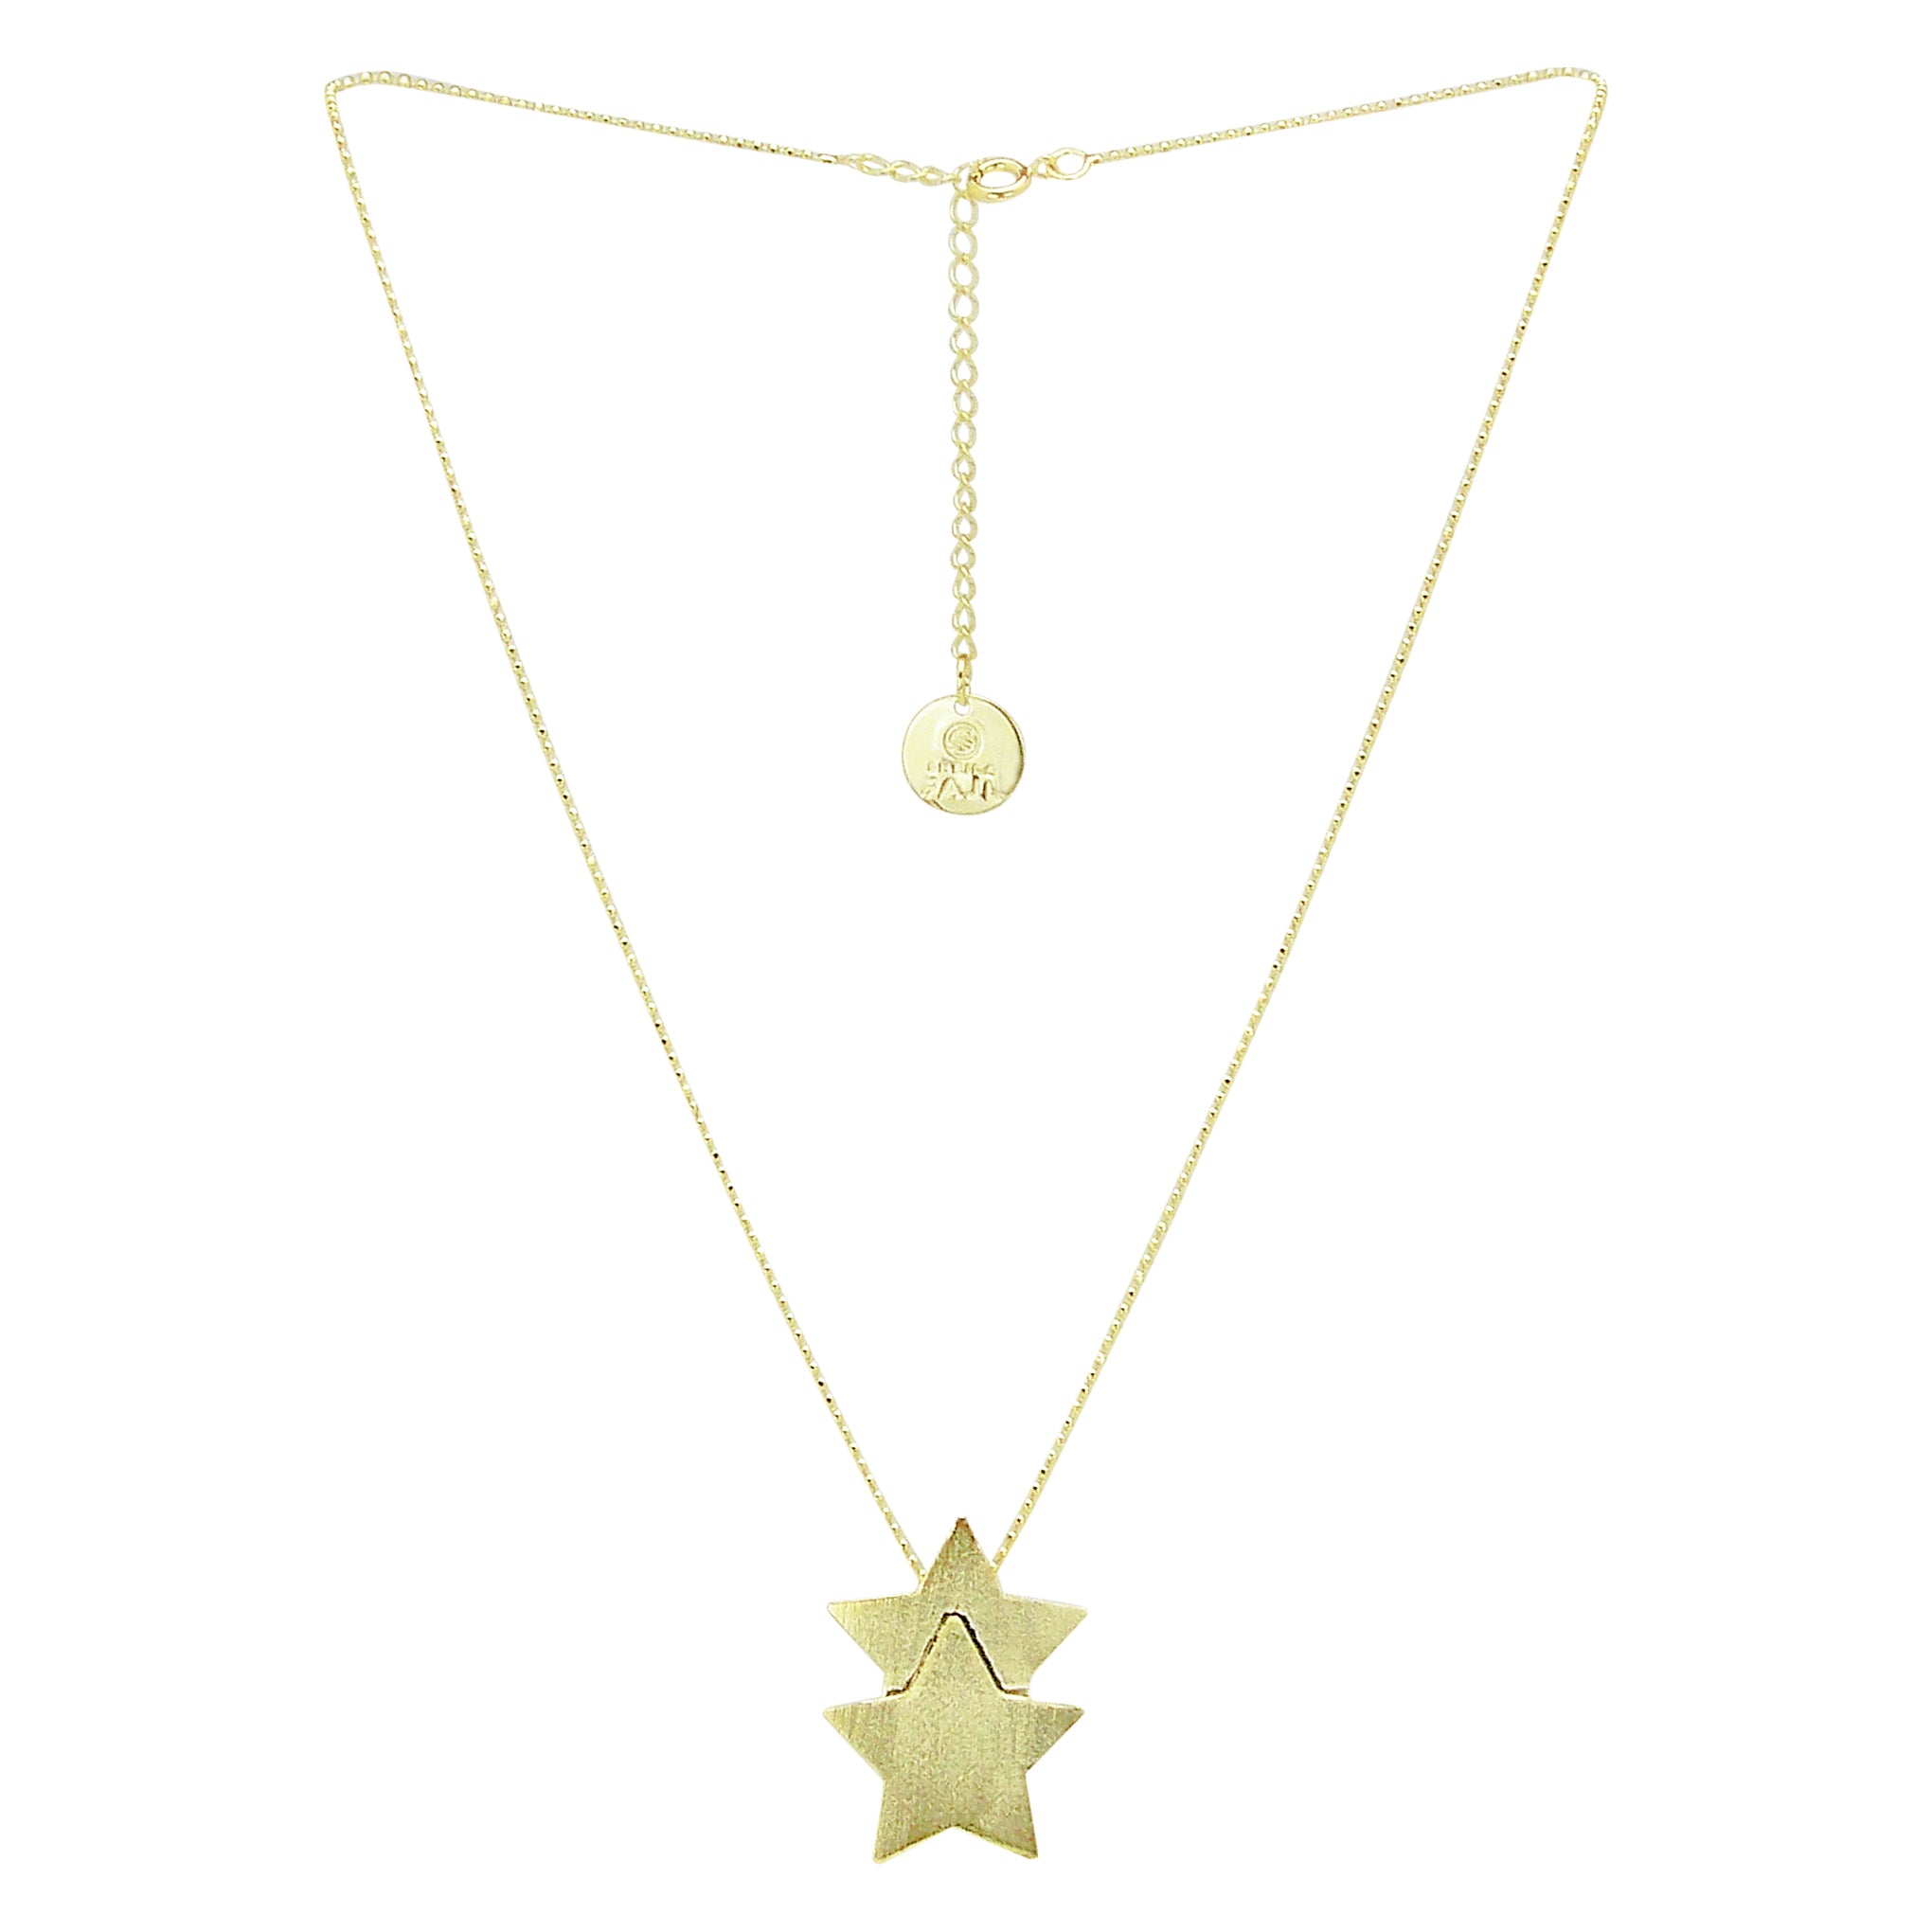 Full image of Sheila Fajl Castor Double Star Pendant Necklace in Gold Plated